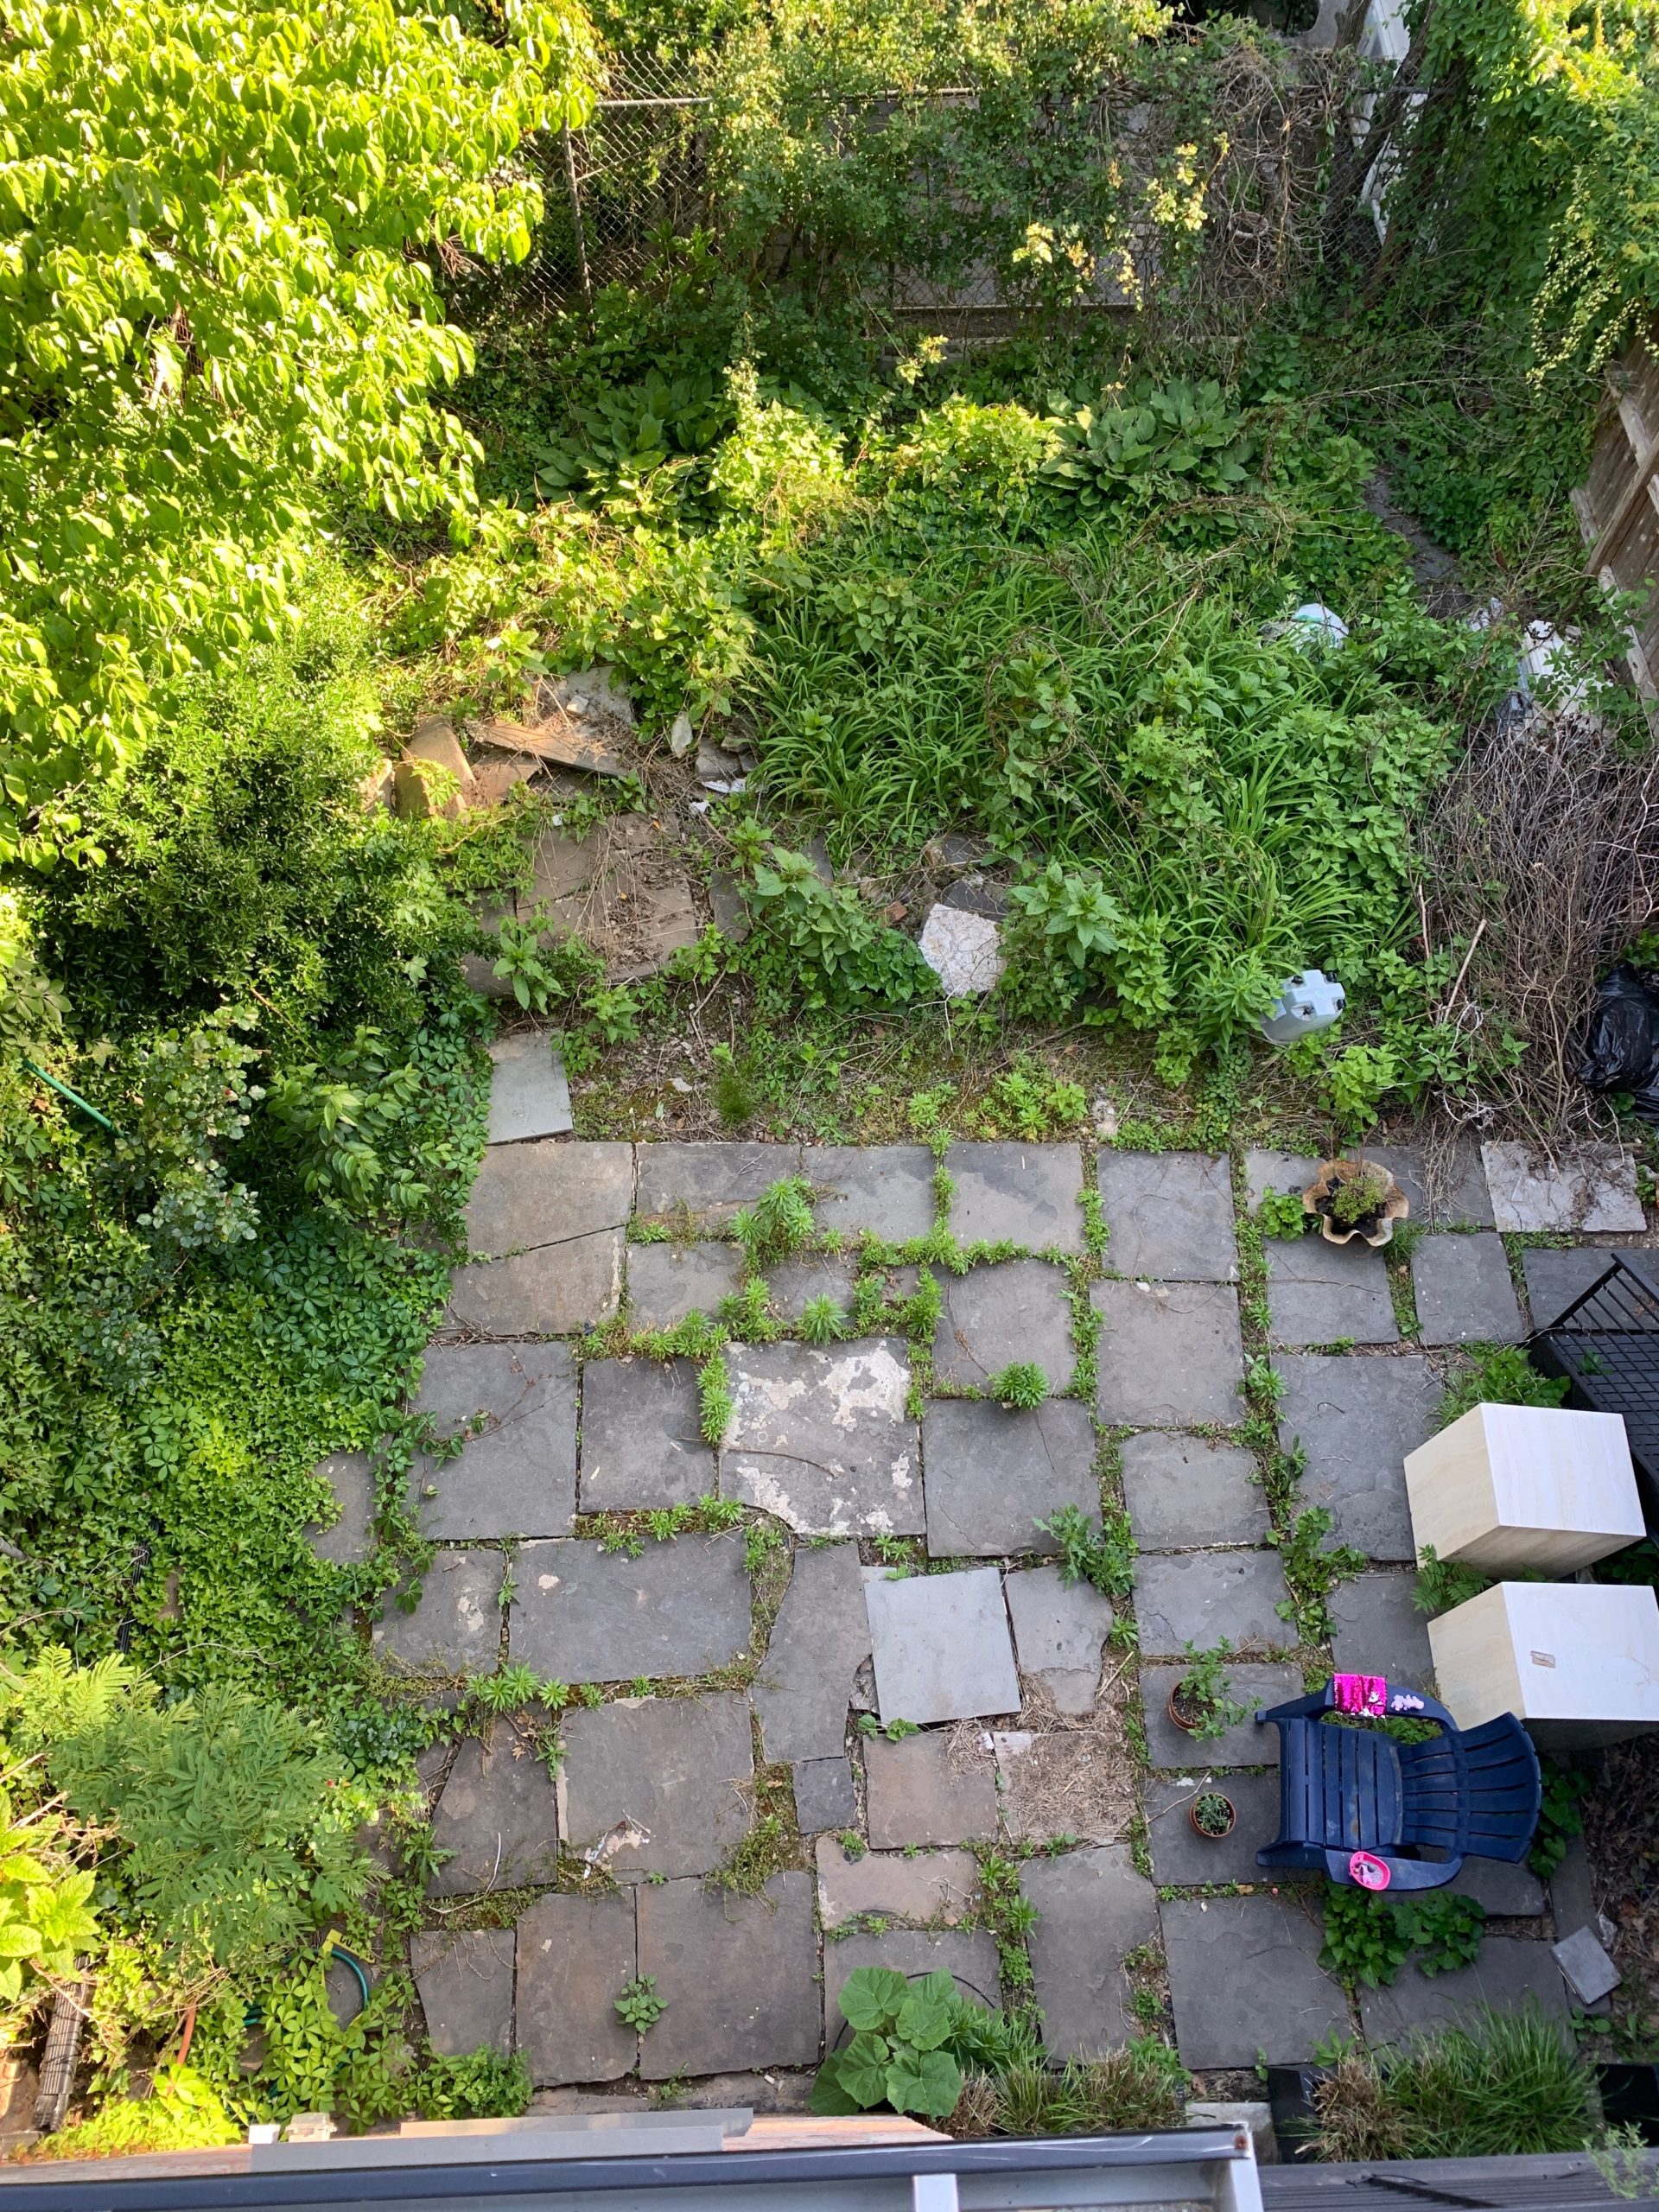 The One Area of Athena’s Brooklyn Home You’ve Never Seen: The Garden!